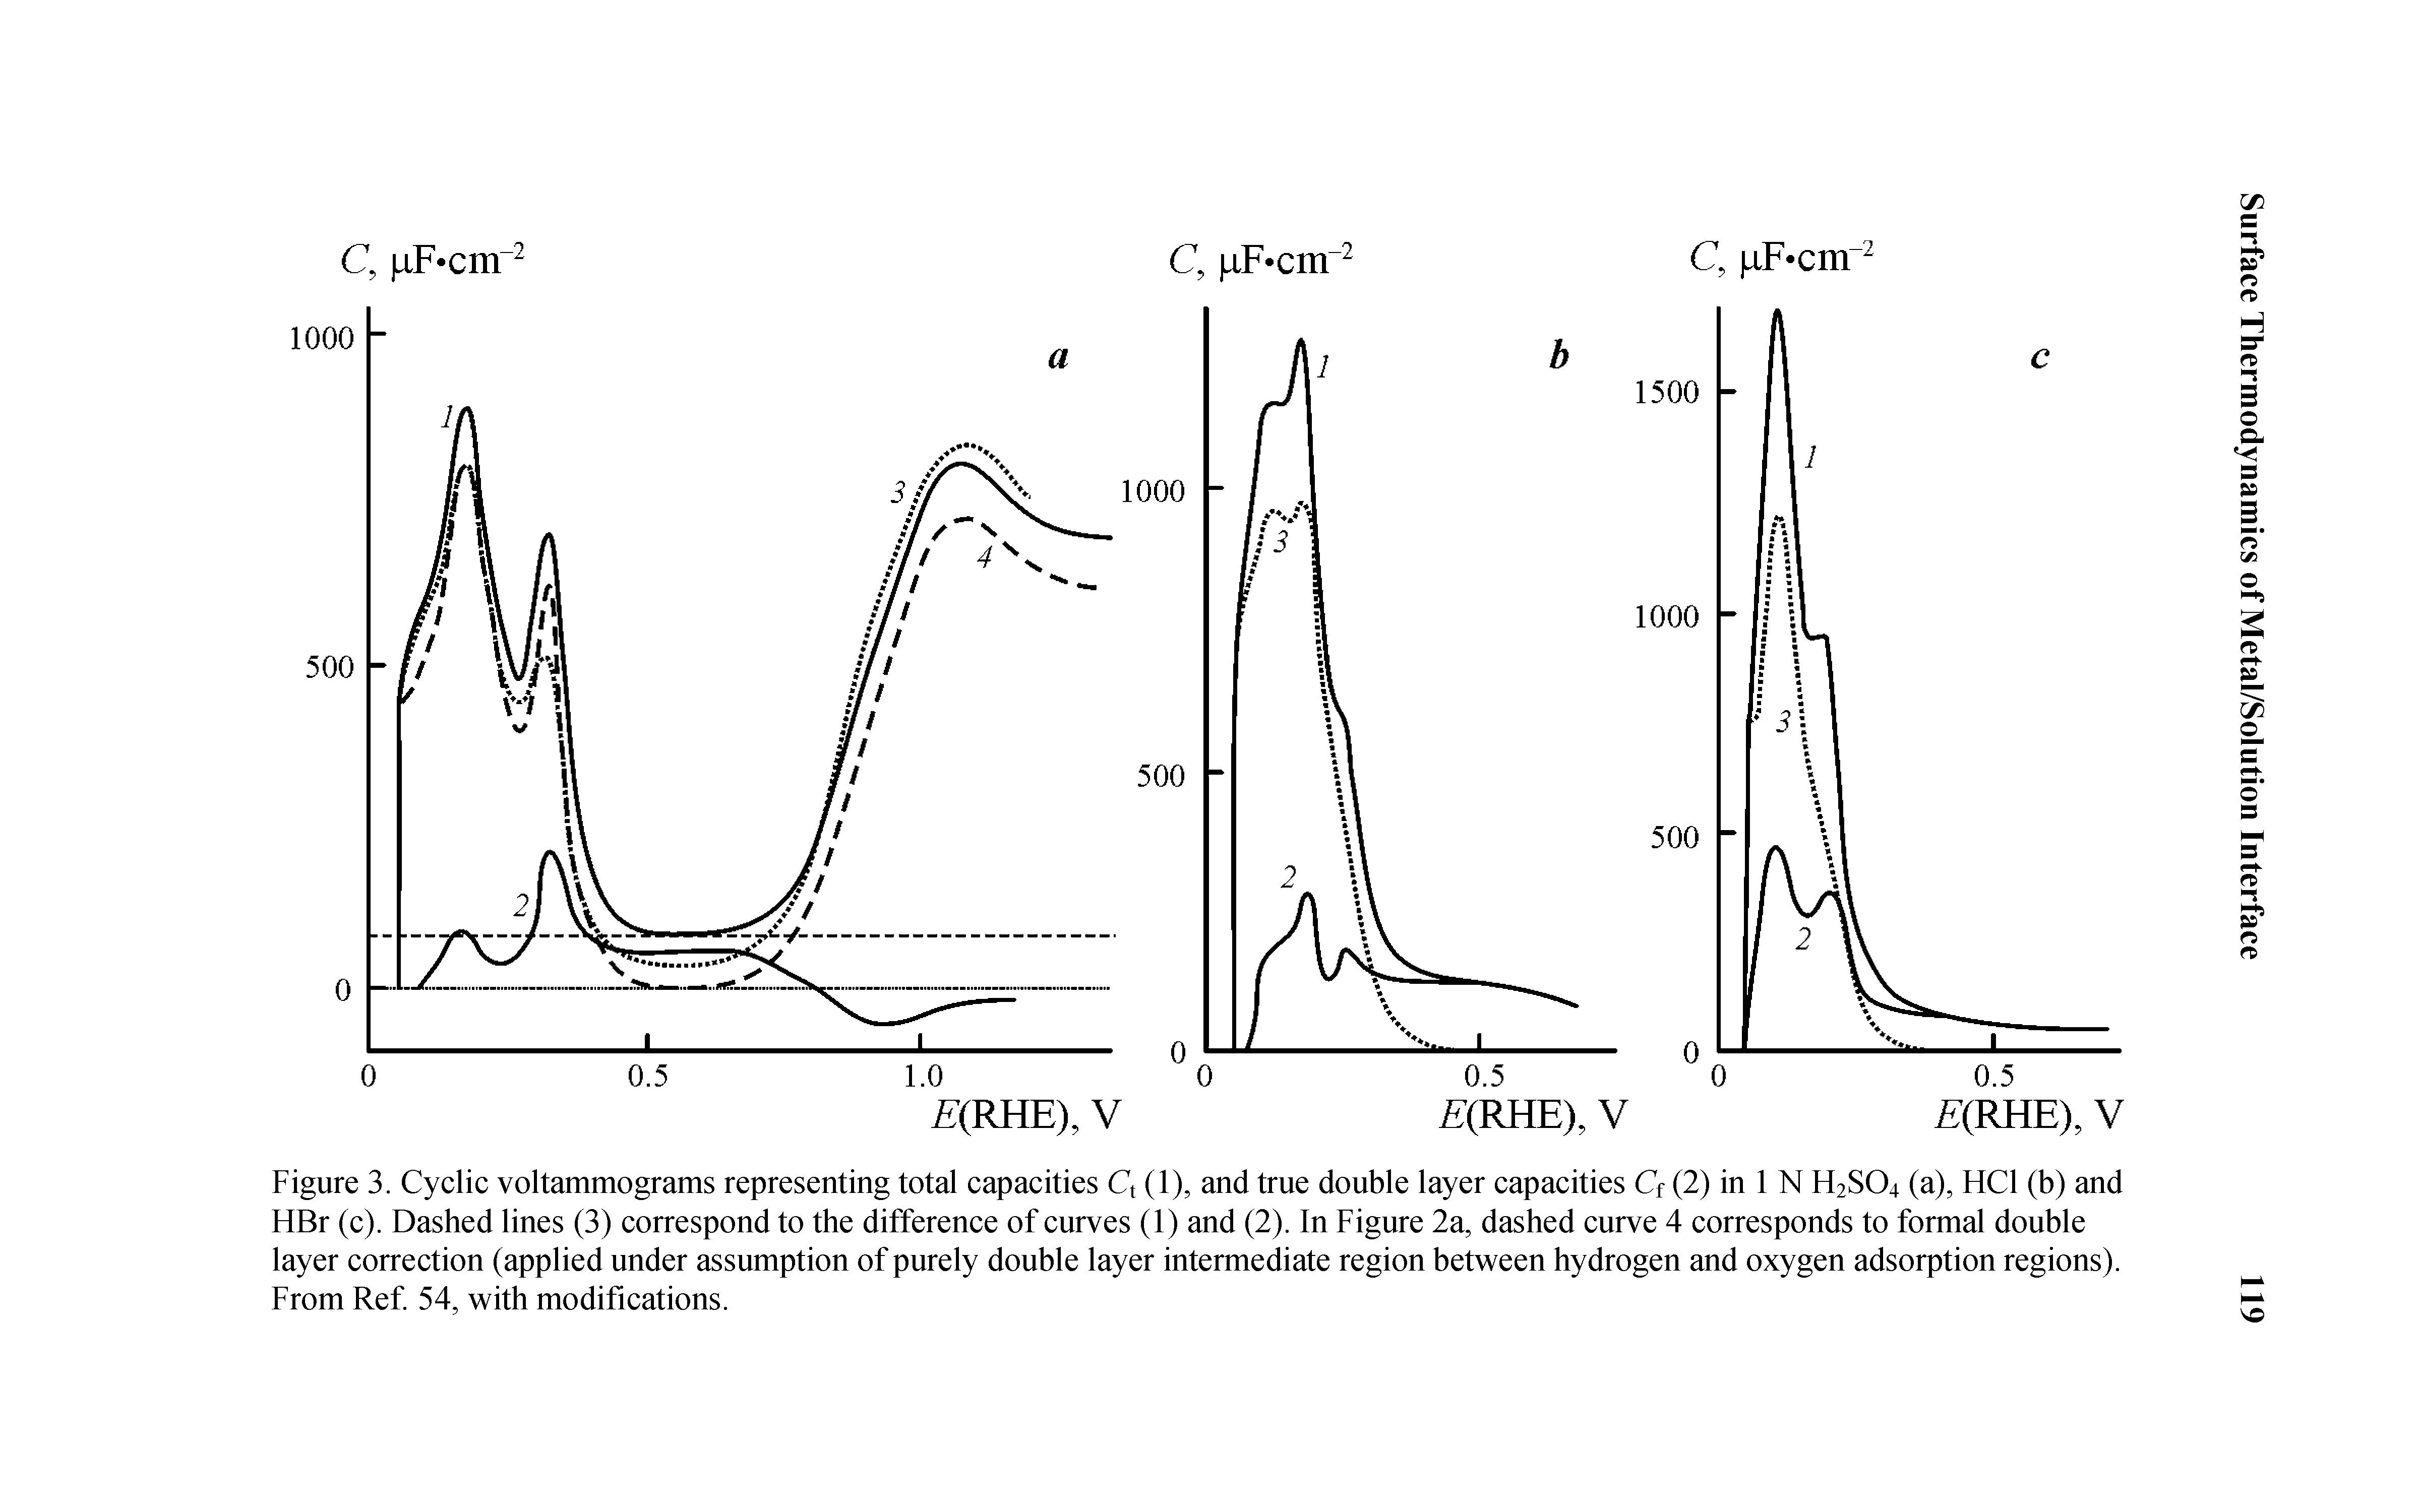 Figure 3. Cyclic voltammograms representing total capacities Q (1), and true double layer capacities Cf (2) in 1 N H2SO4 (a), HCl (b) and HBr (c). Dashed lines (3) correspond to the difference of curves (1) and (2). In Figure 2a, dashed curve 4 corresponds to formal double layer correction (applied under assumption of purely double layer intermediate region between hydrogen and oxygen adsorption regions). From Ref 54, with modifications.